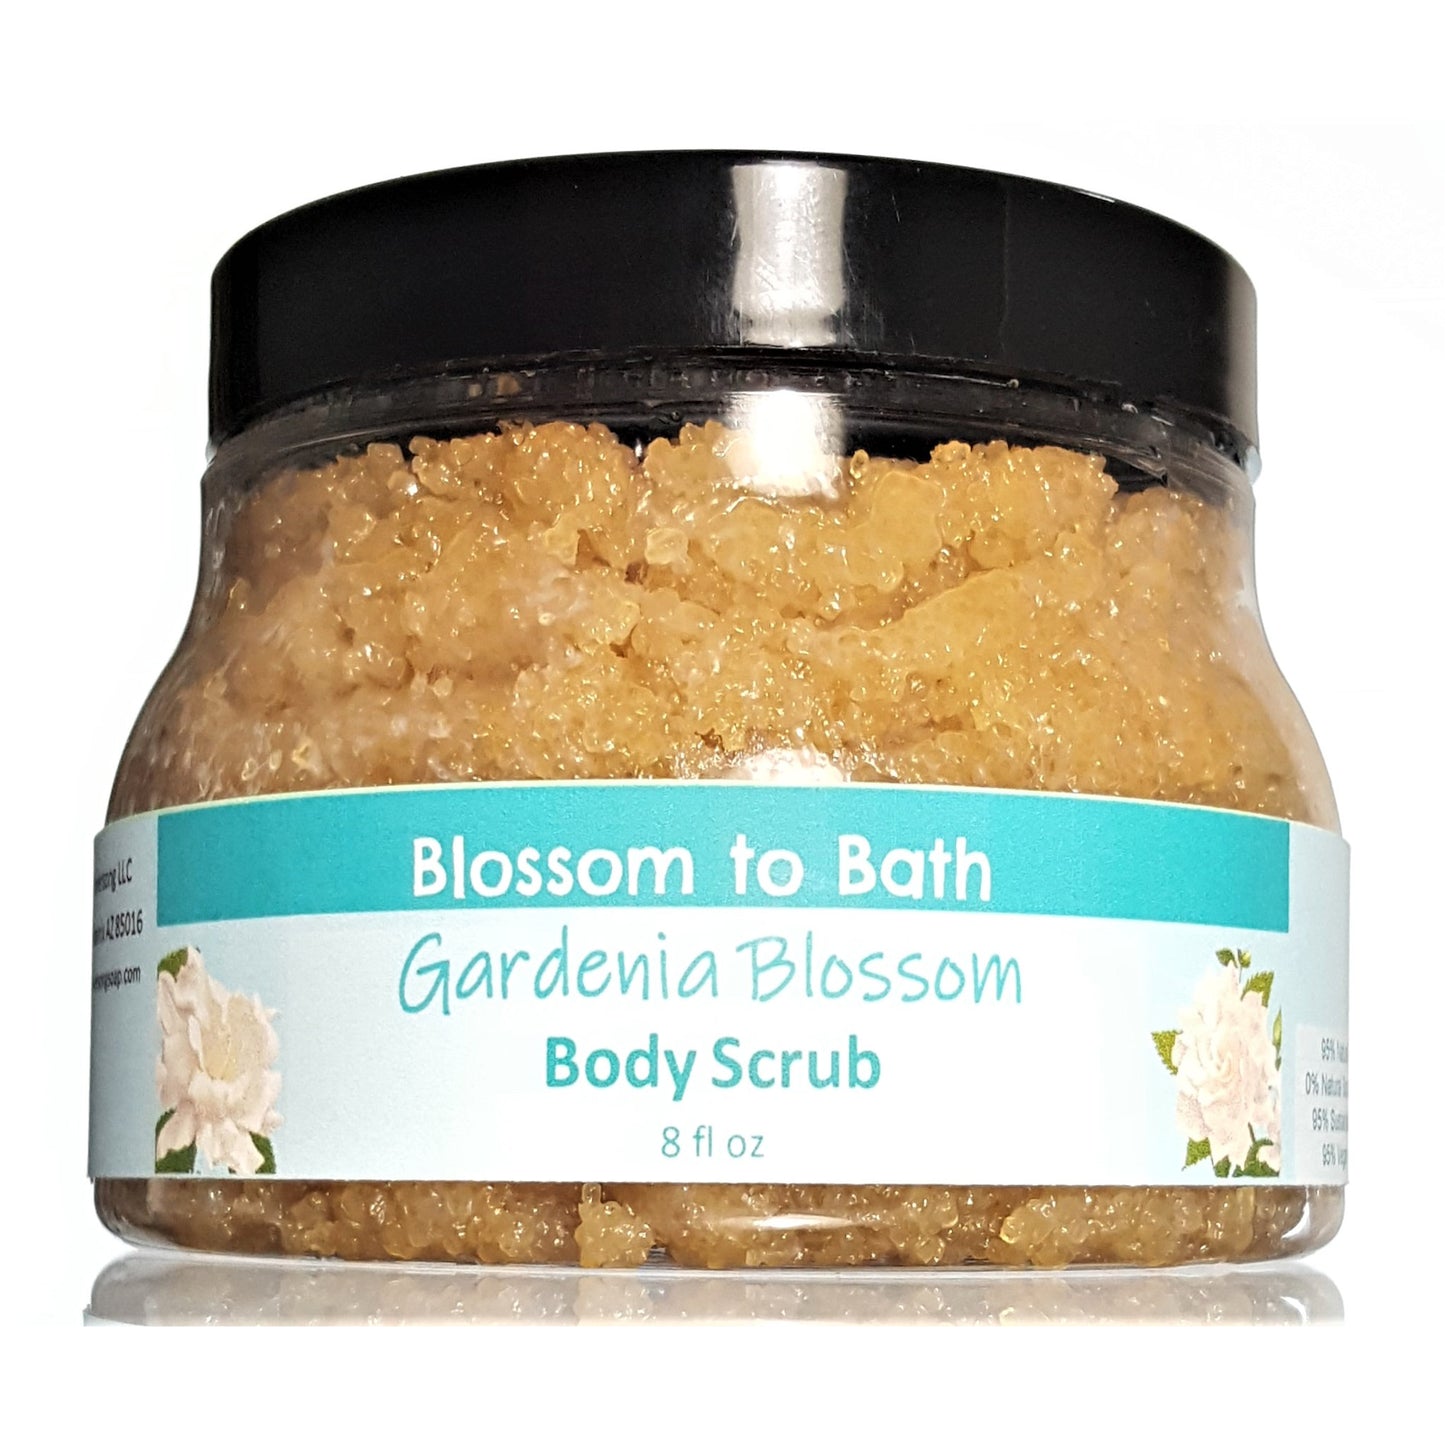 Buy Blossom to Bath Gardenia Blossom Body Scrub from Flowersong Soap Studio.  Large crystal turbinado sugar plus  rich oils conveniently exfoliate and moisturize in one step  Sweet Gardenia in a puff of blooming summer flowers